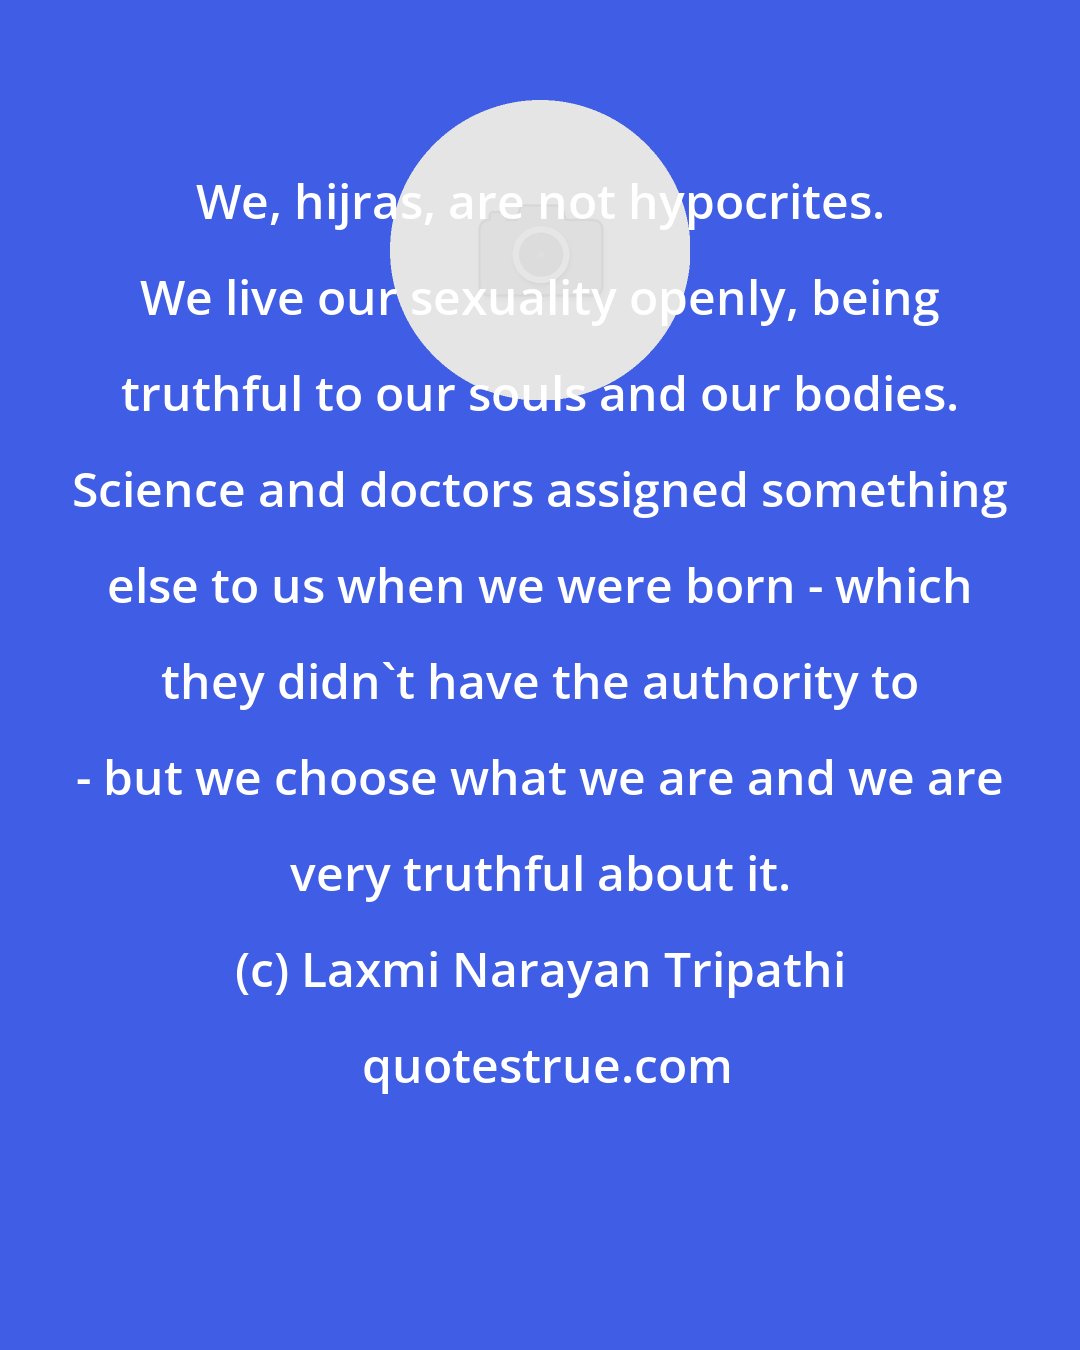 Laxmi Narayan Tripathi: We, hijras, are not hypocrites. We live our sexuality openly, being truthful to our souls and our bodies. Science and doctors assigned something else to us when we were born - which they didn't have the authority to - but we choose what we are and we are very truthful about it.